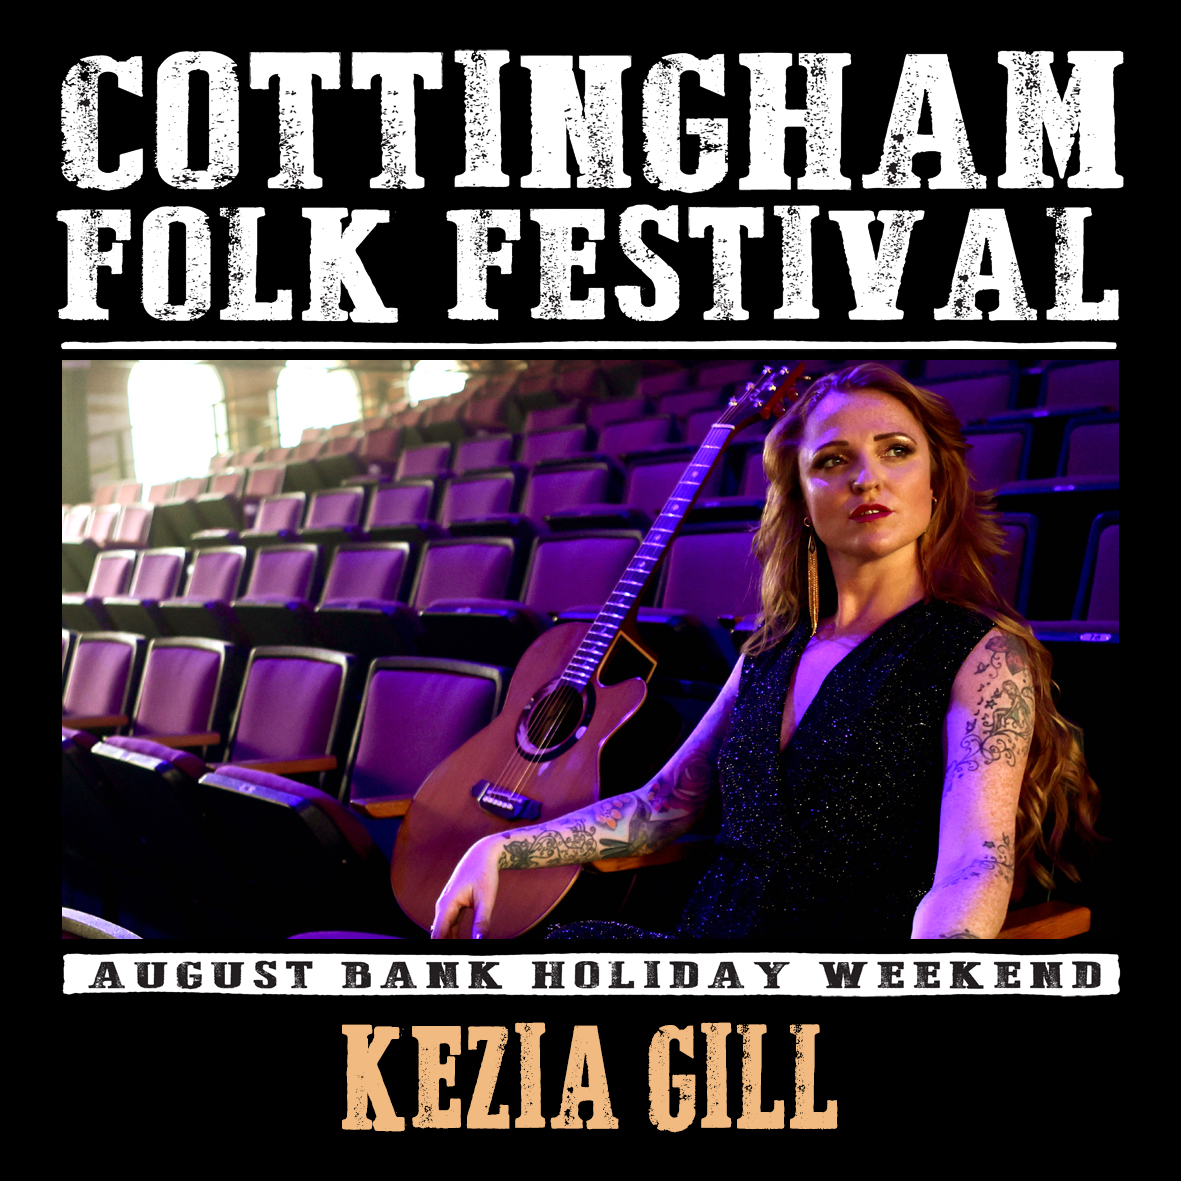 Kezia Gill pulls influences from a wide range of genres including Folk & Irish, Country, Rock and Blues, making her sound unique. With the songwriting ability of a country artist, the stage presence of a rockstar and the voice of the blues, she makes every song her own.